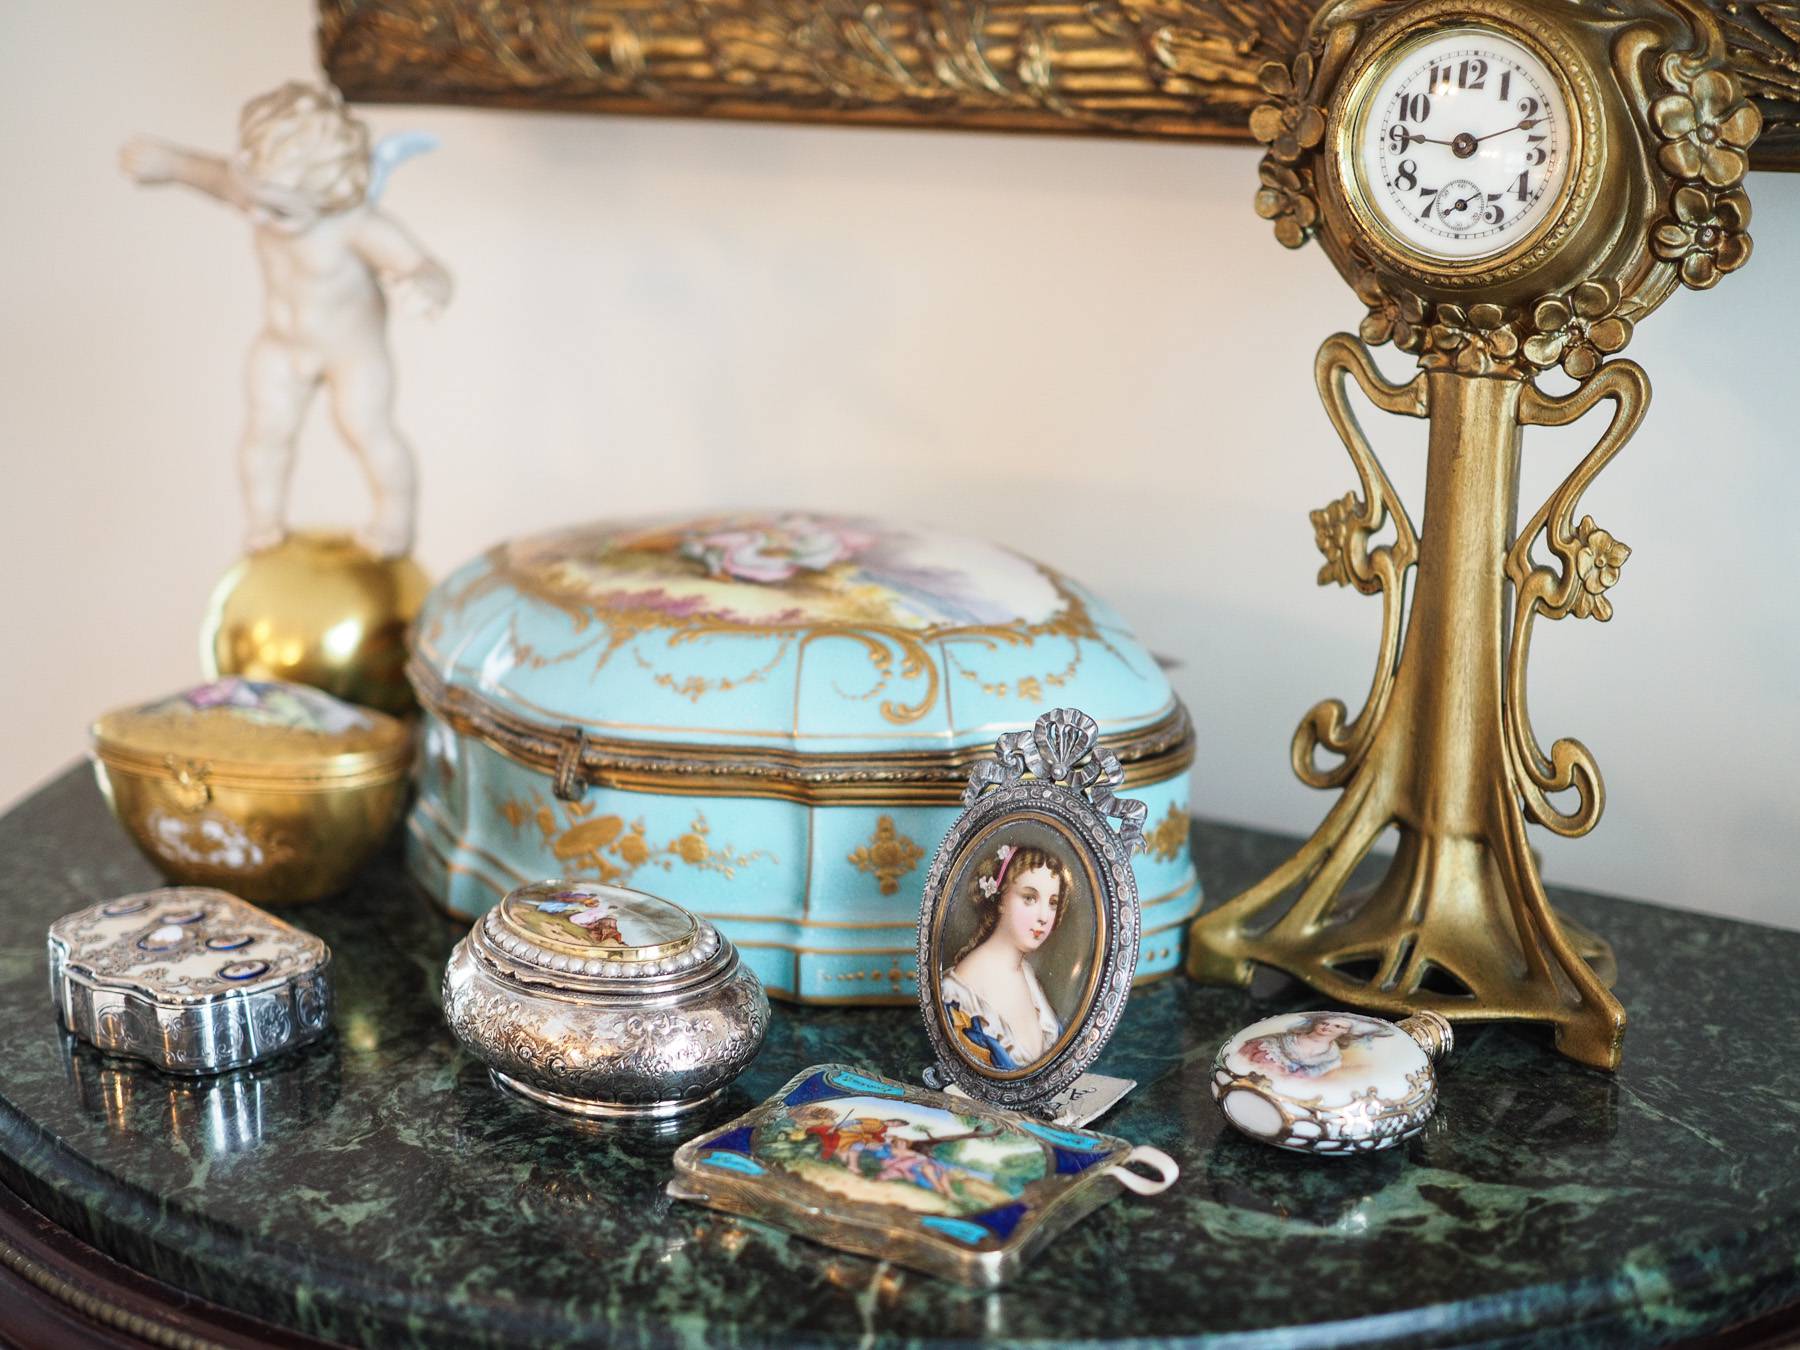 granite table with an old clock, and old pretty trinkets